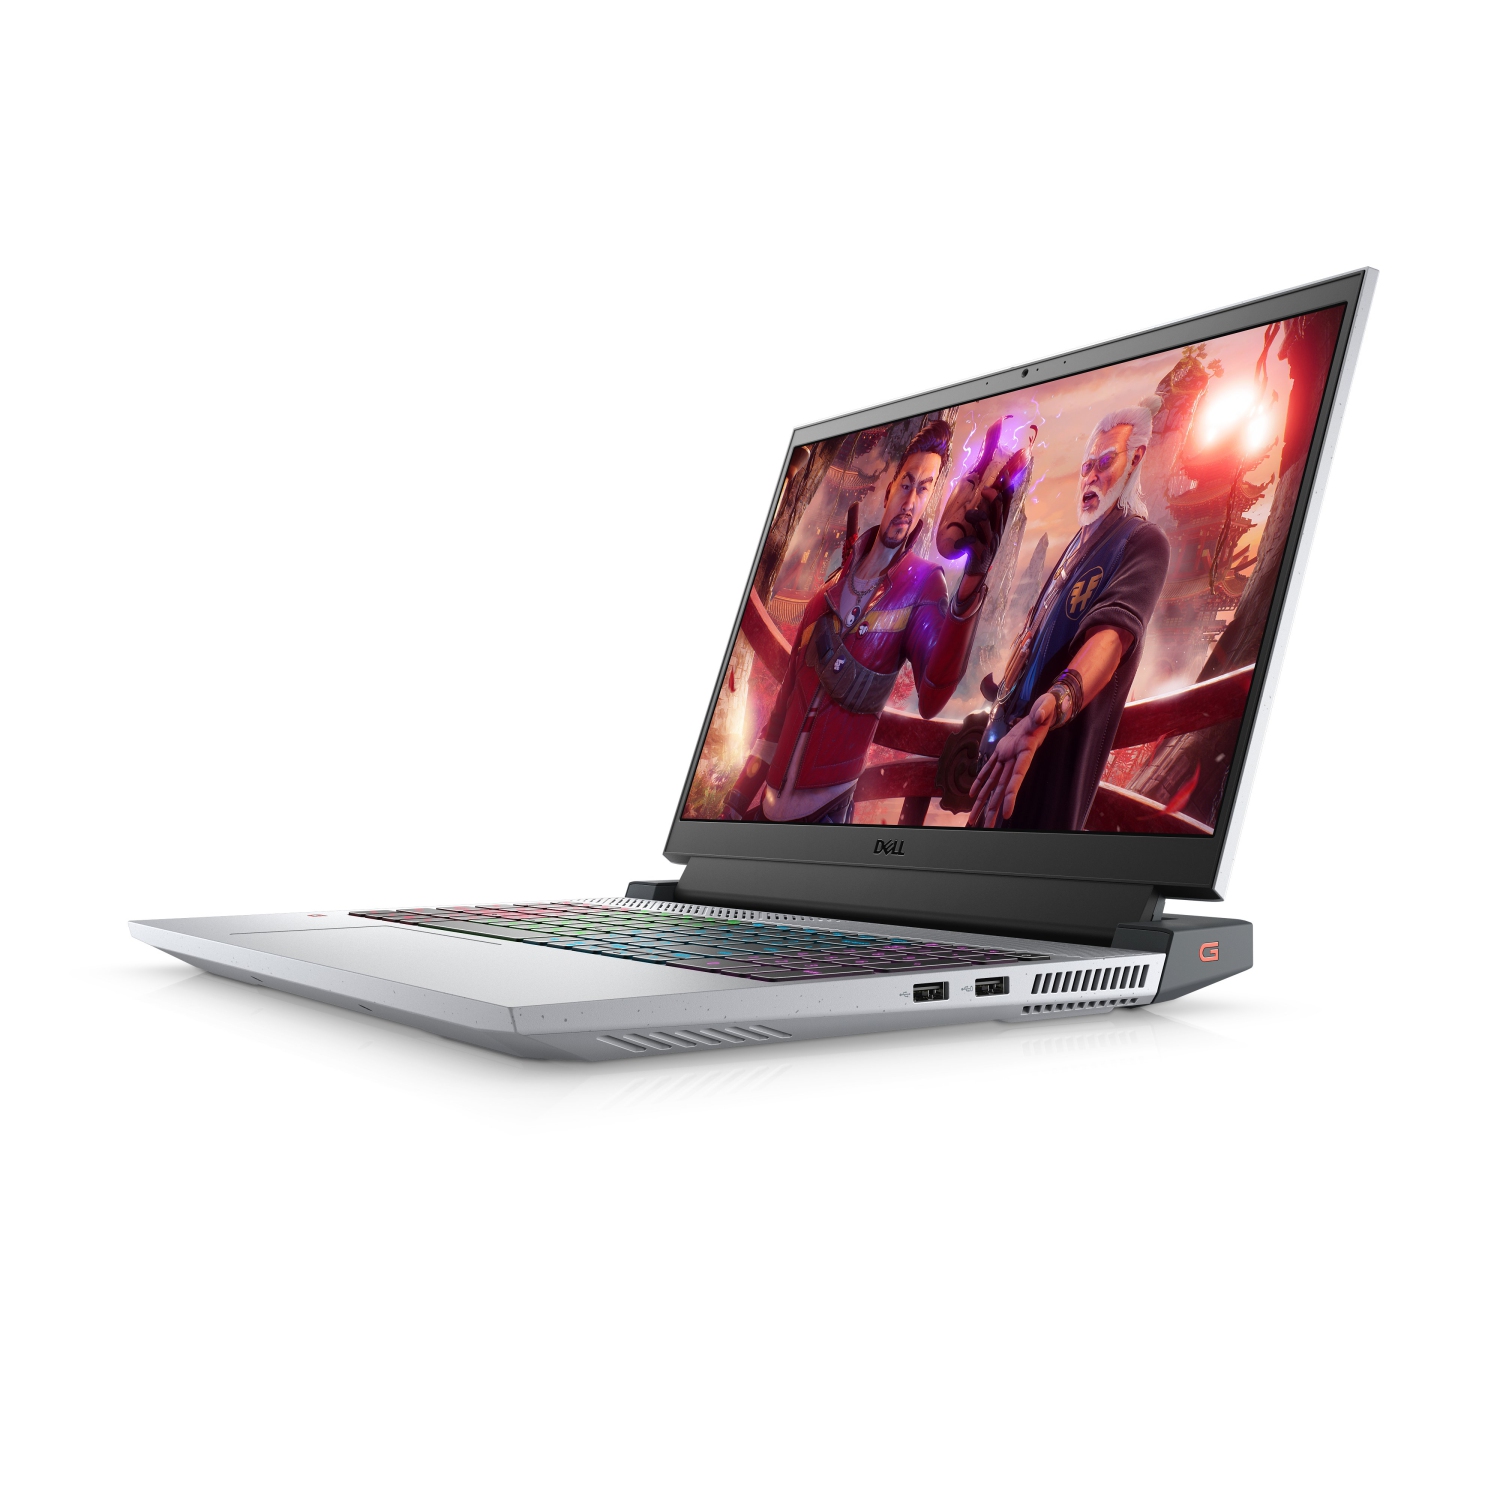 Refurbished (Excellent) - Dell G15 5515 Gaming Laptop (2021) | 15.6" FHD | Core Ryzen 5 - 256GB SSD - 8GB RAM - RTX 3050 | 6 Cores @ 4.2 GHz Certified Refurbished